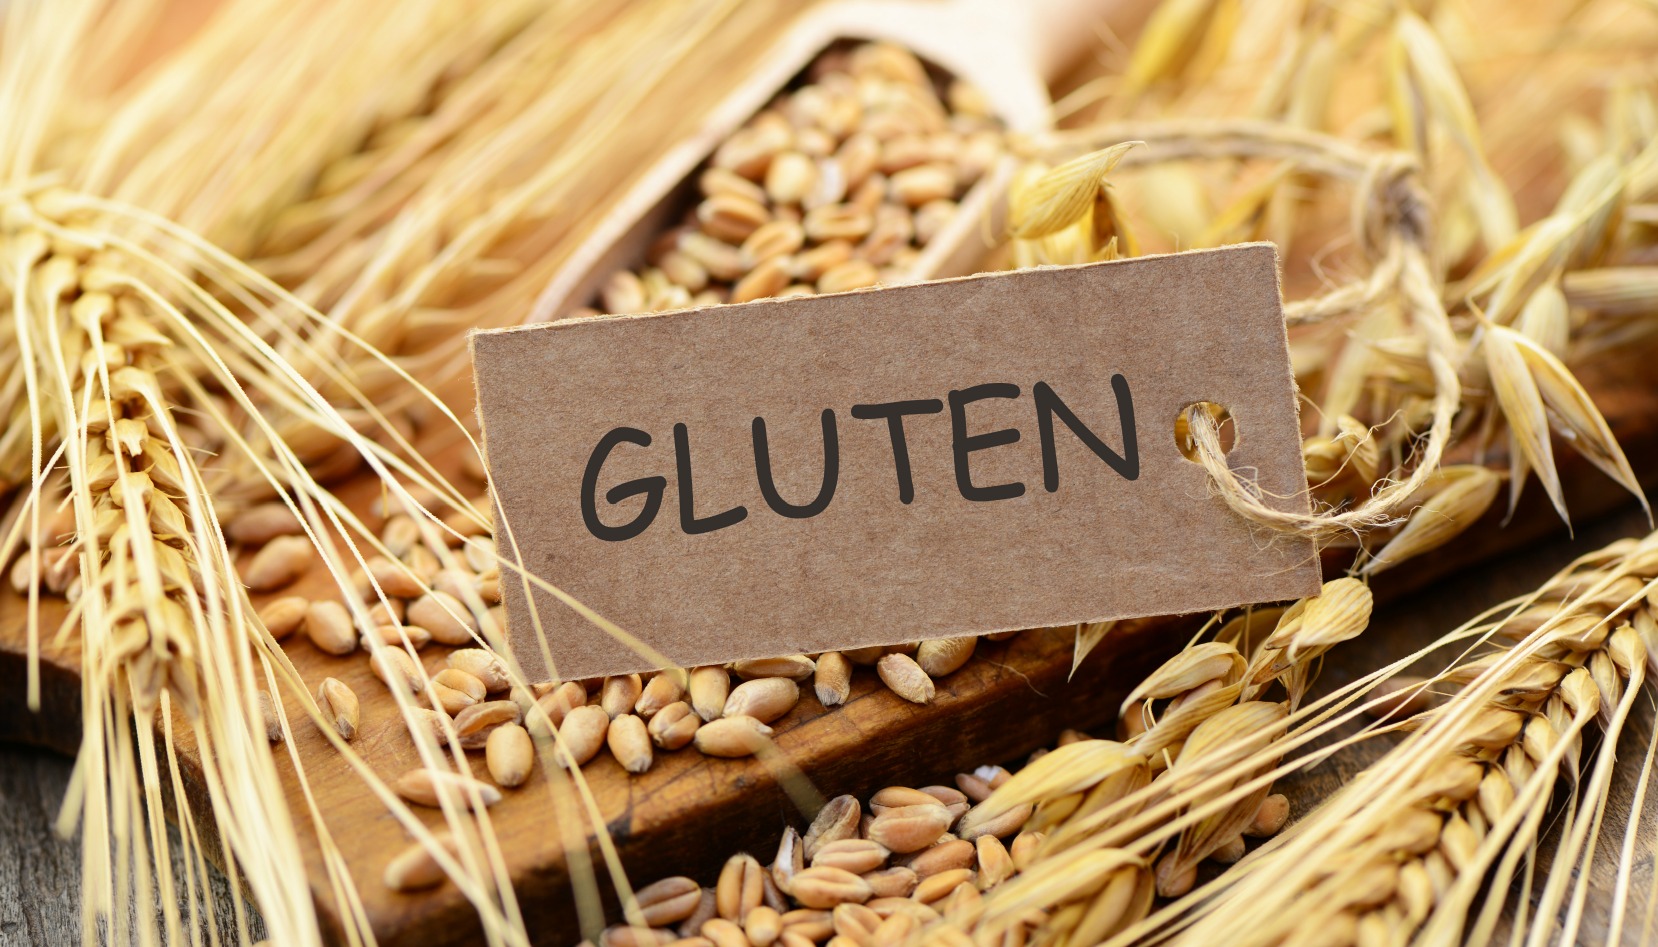 Oh No! My Date is Gluten-Free. Help! – Sather Health